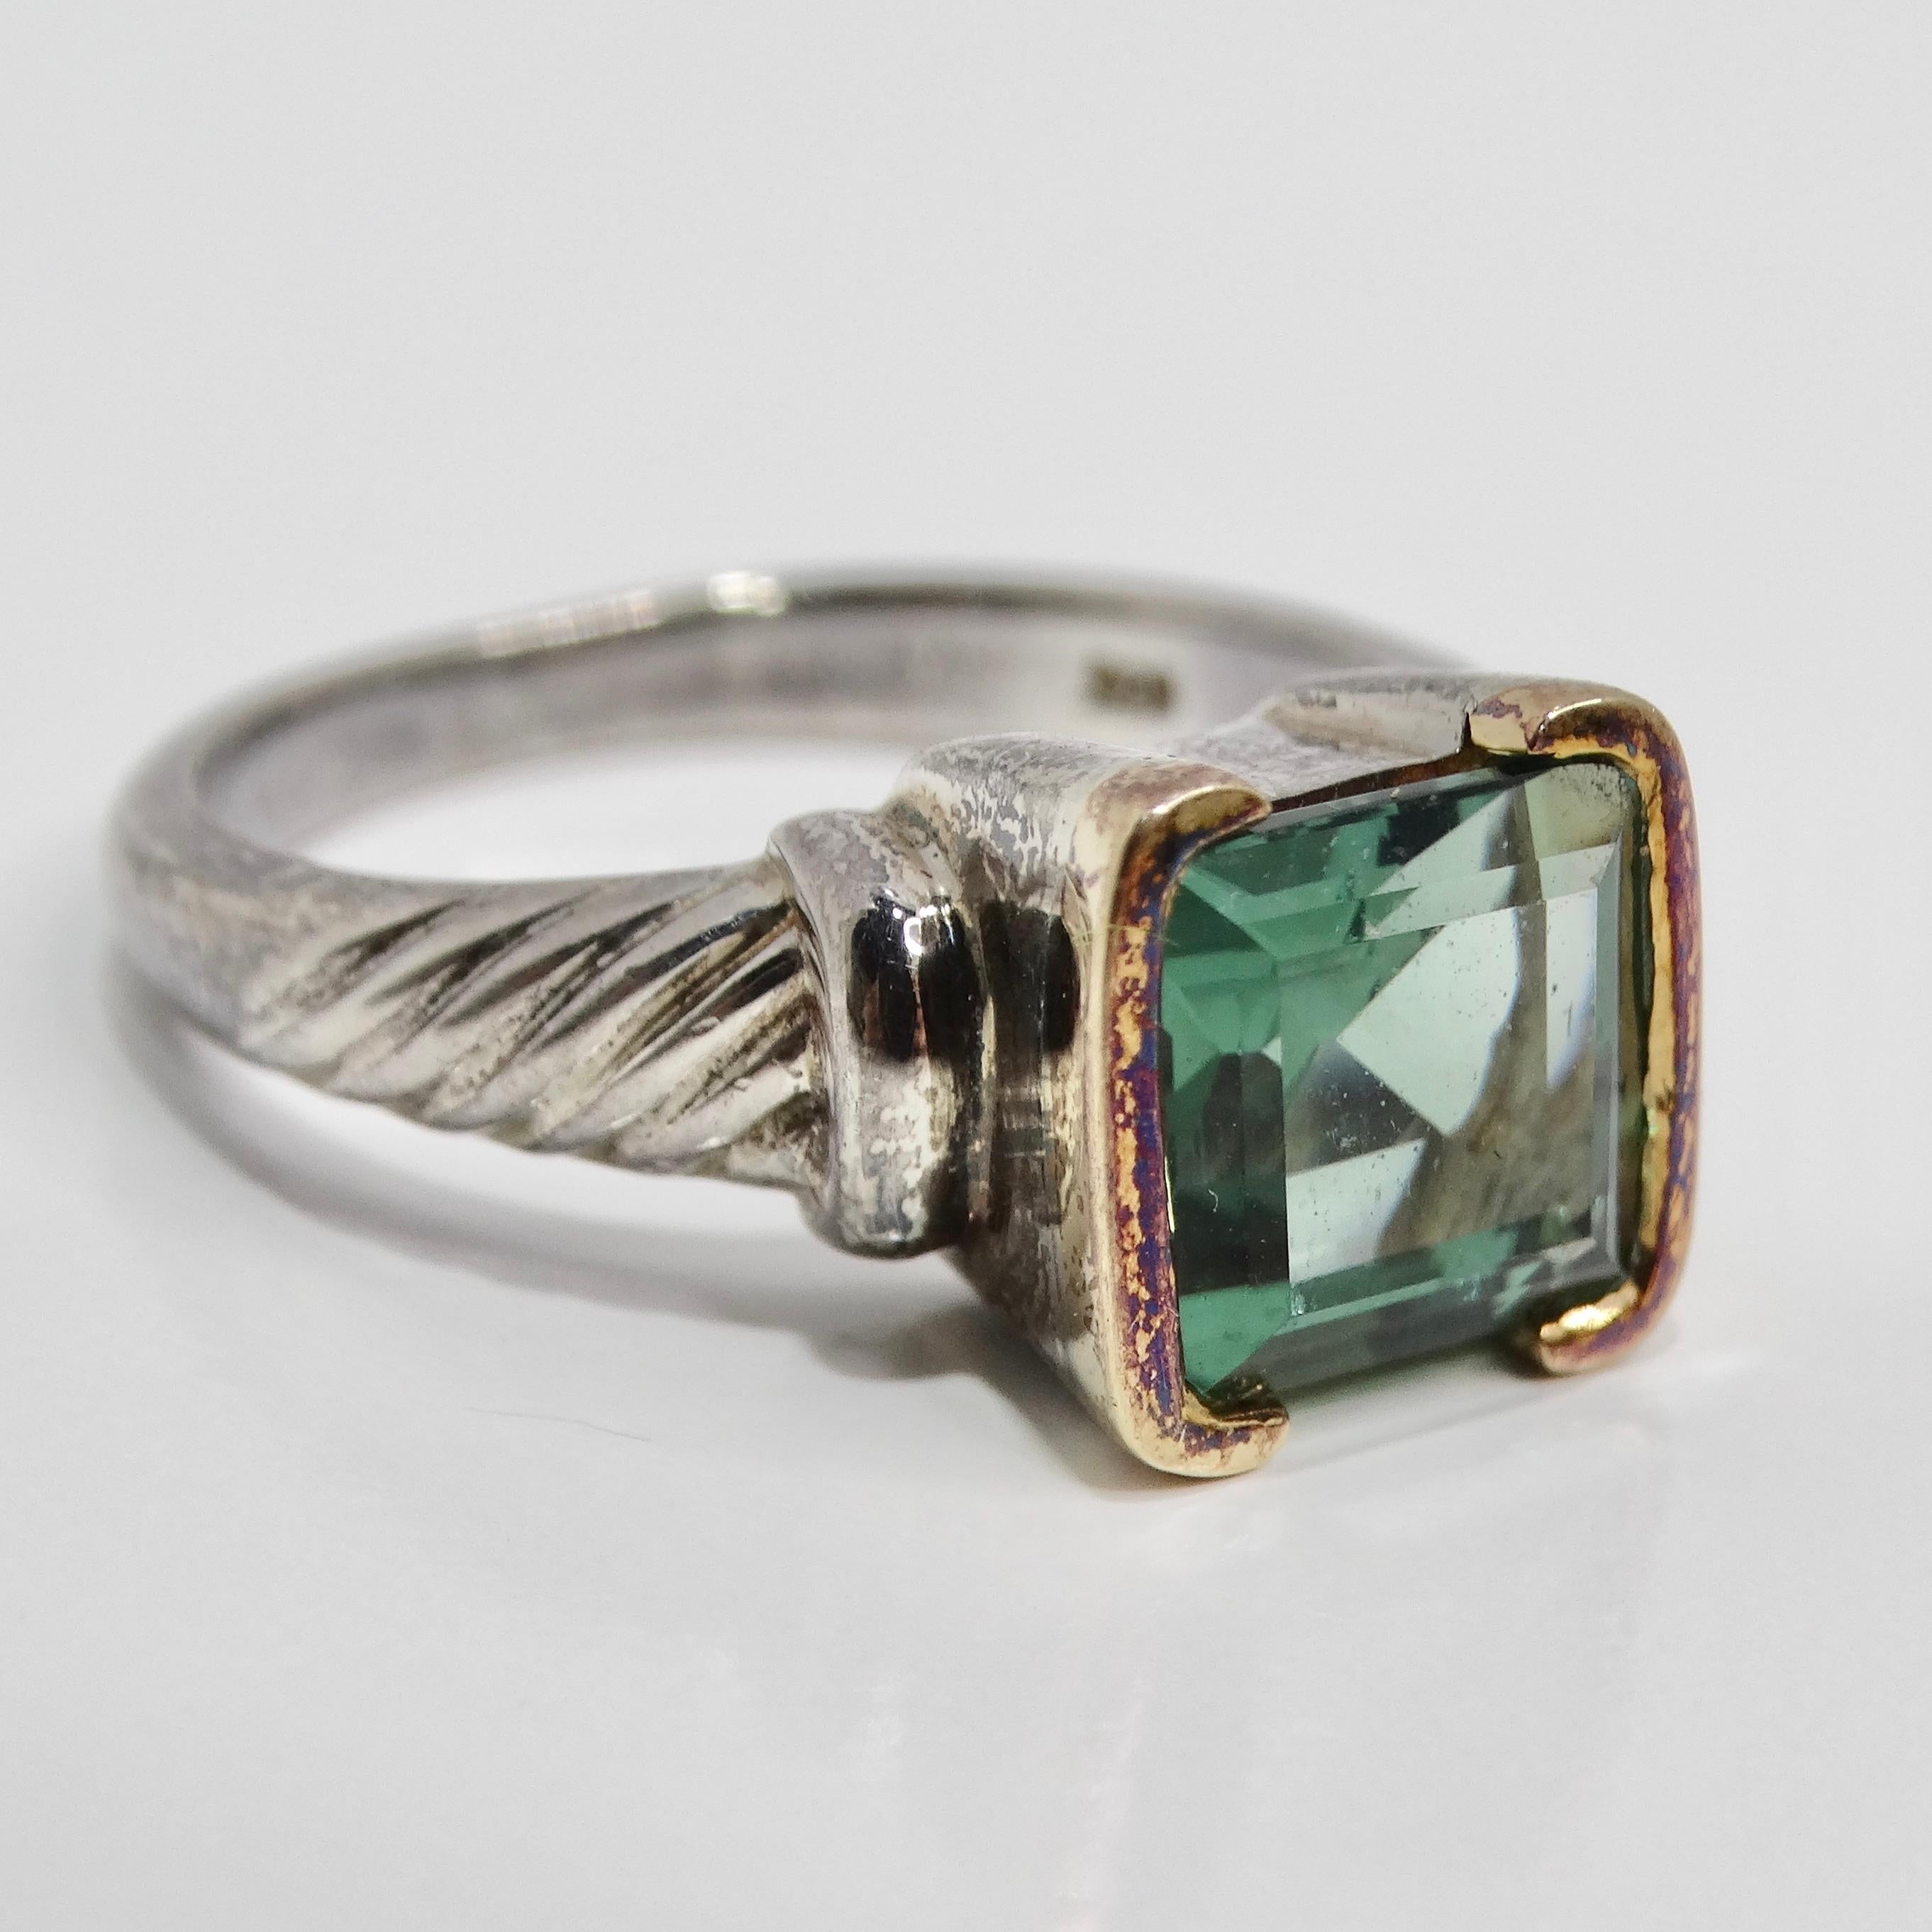 Introducing the 14K Rose Gold 1970s Tourmaline Ring, a stunning vintage cocktail ring that exudes luxury and elegance. This exquisite piece features a beautiful green tourmaline center stone, known for its vibrant hue and captivating sparkle. The